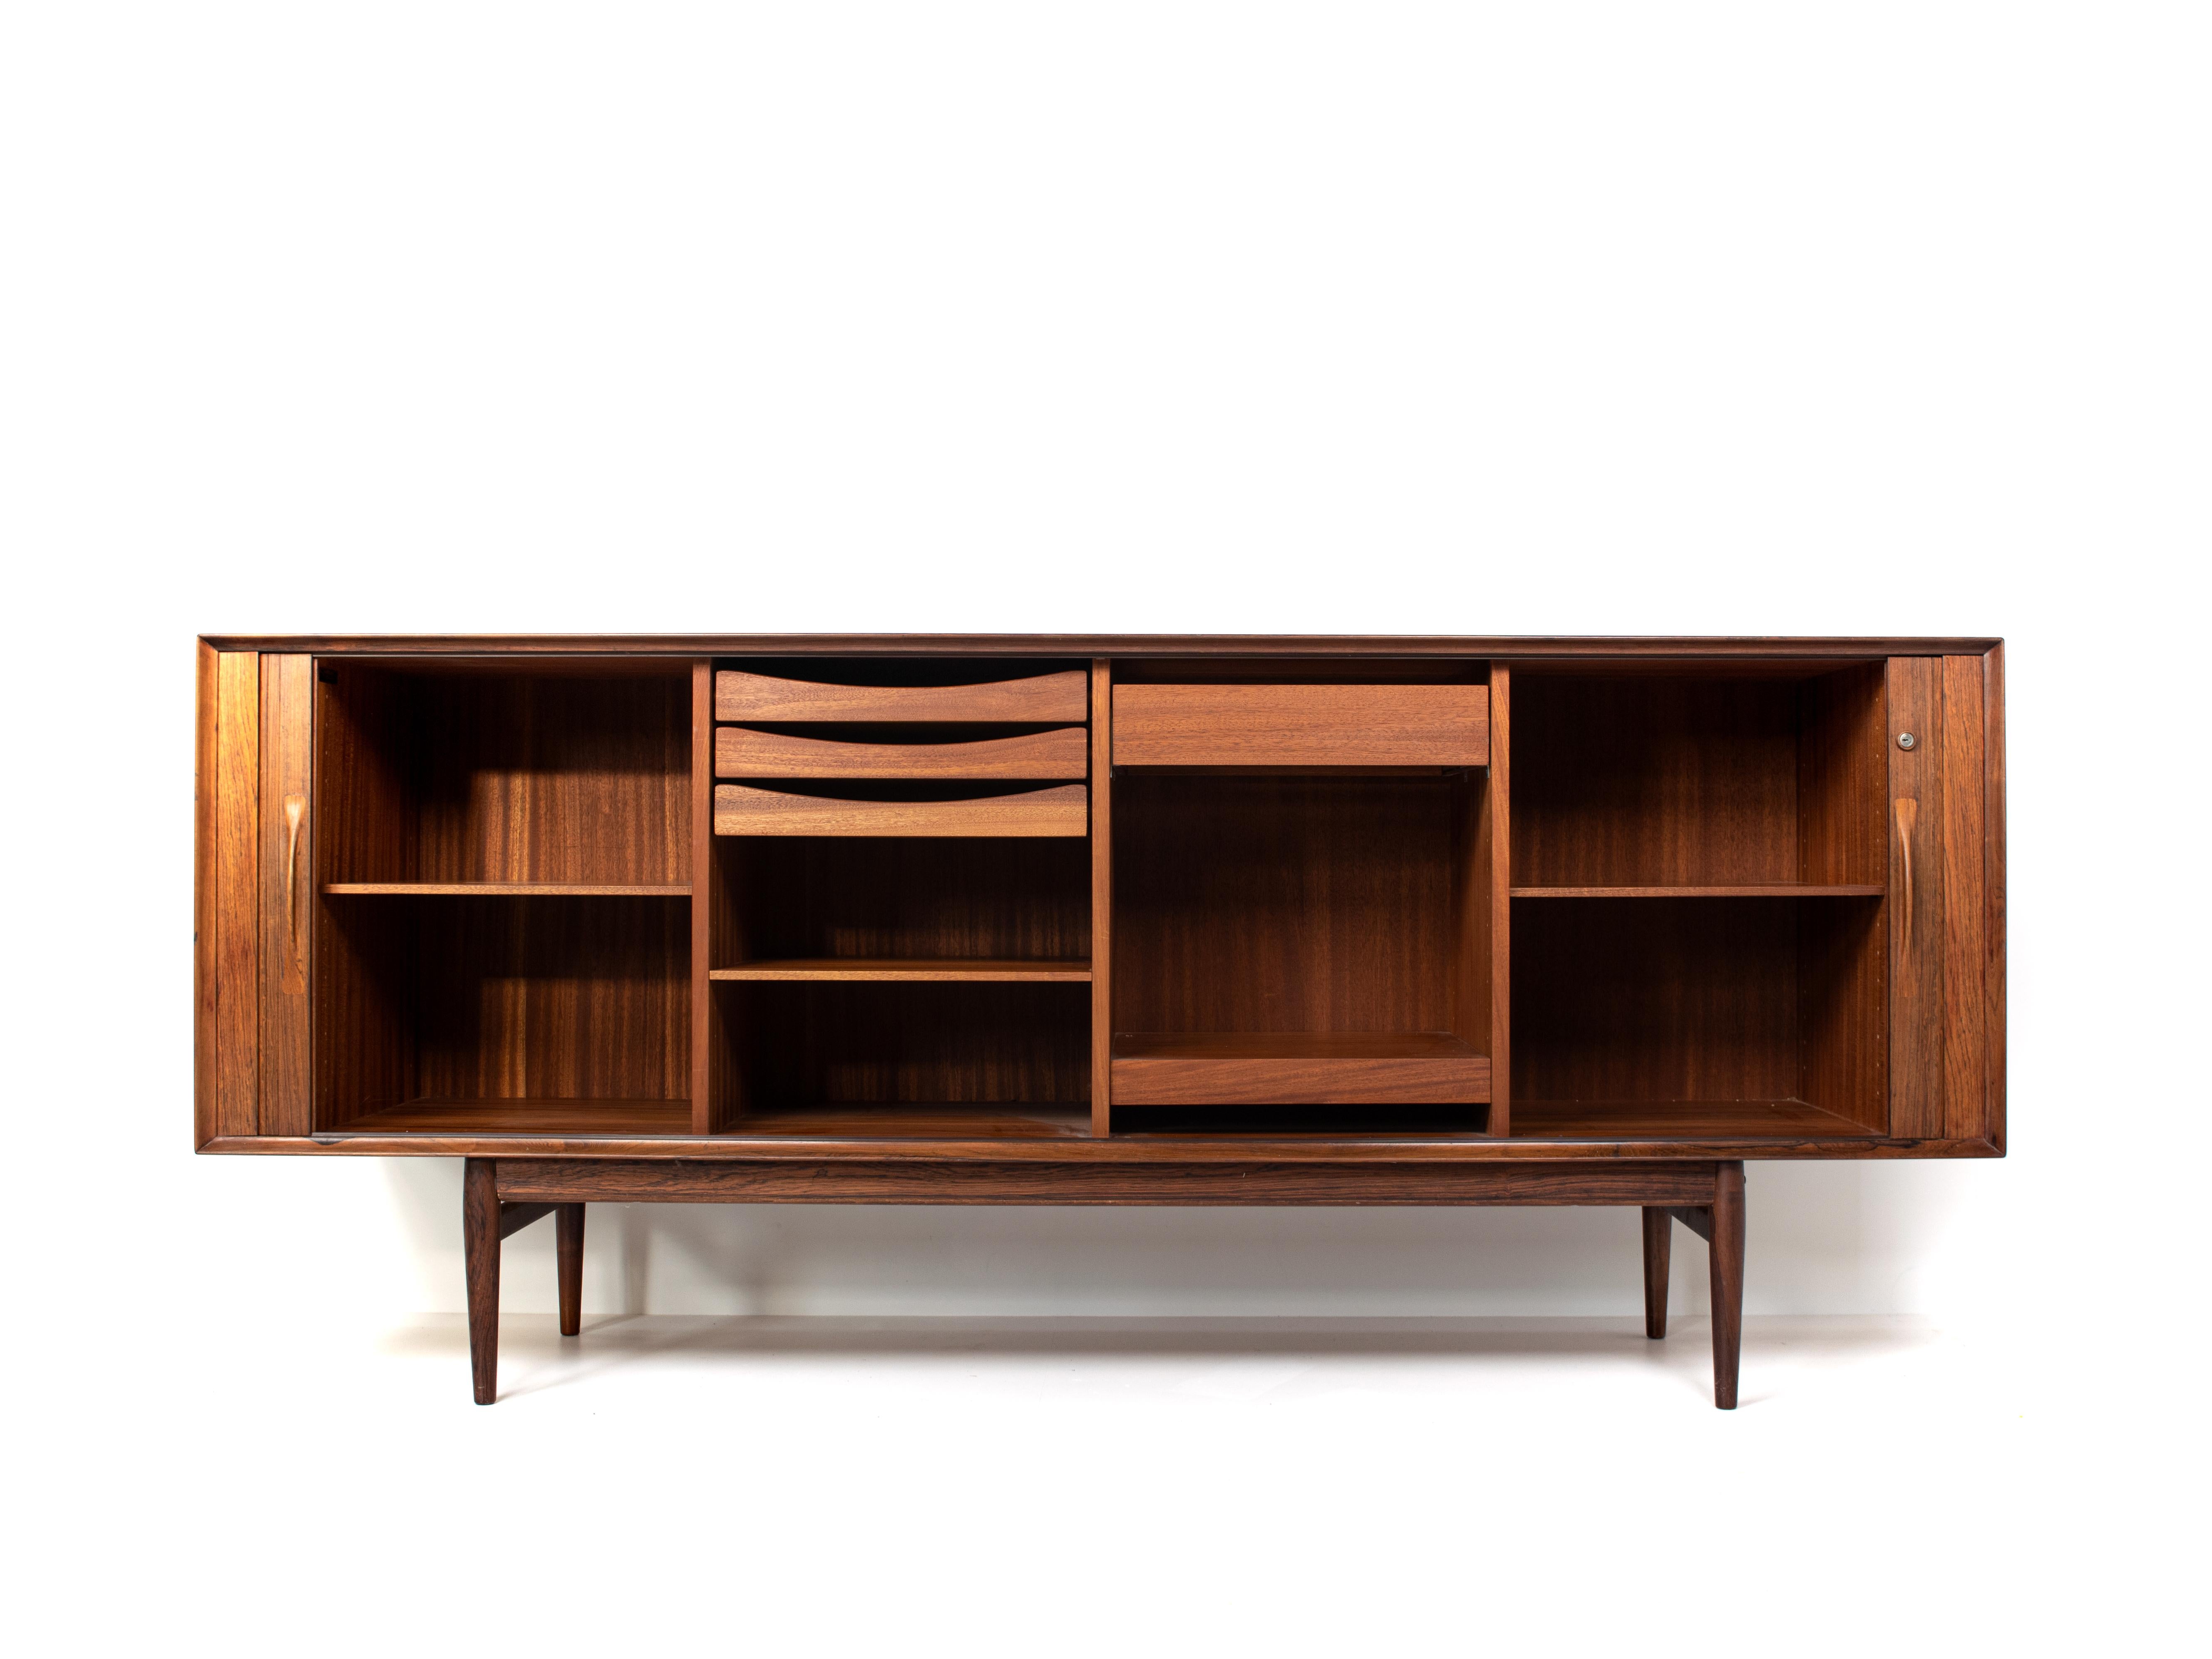 Stunning Arne Vodder sideboard with tambour doors in rosewood for Sibast Møbler from Denmark, 1960s. It's Minimalist design. The craftsmanship on the tambour doors stands out. The doors slide easily with small panels of wood, it is very impressive.